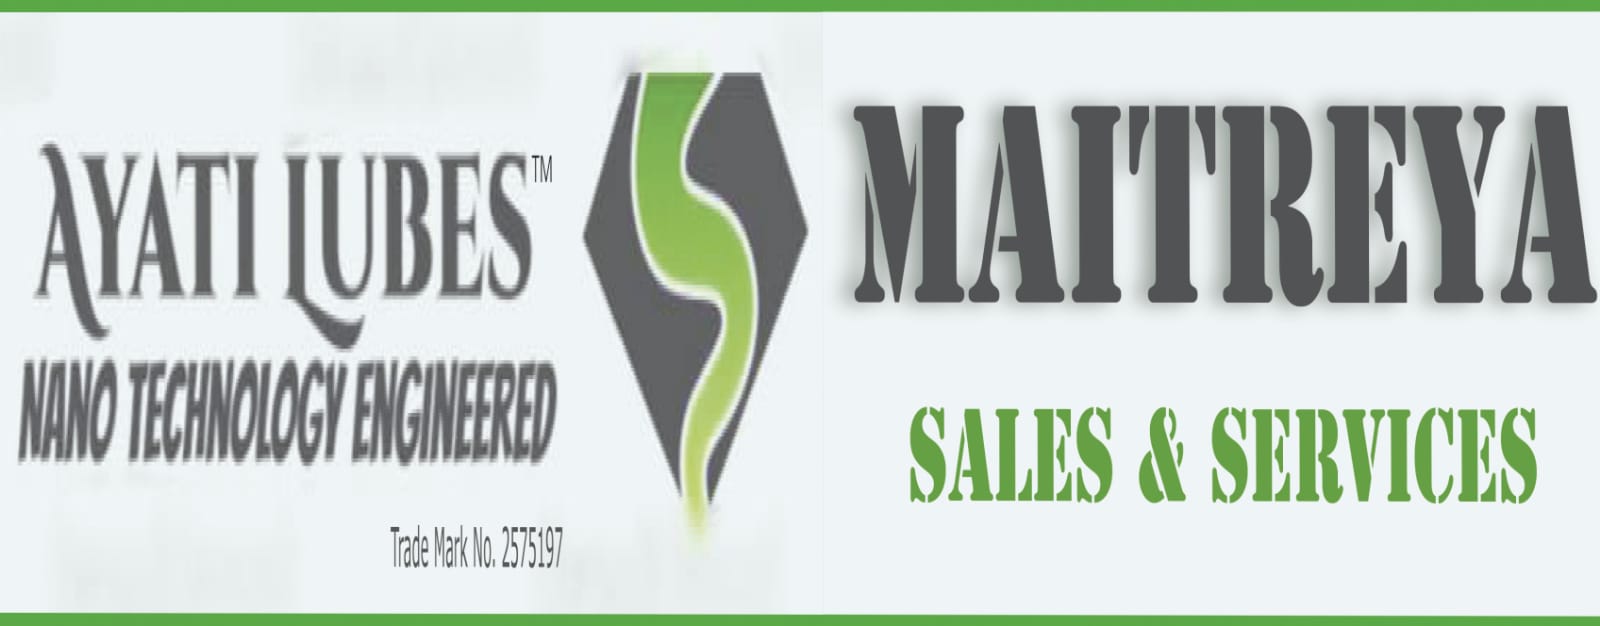 MAITREYA SALES AND SERVICES